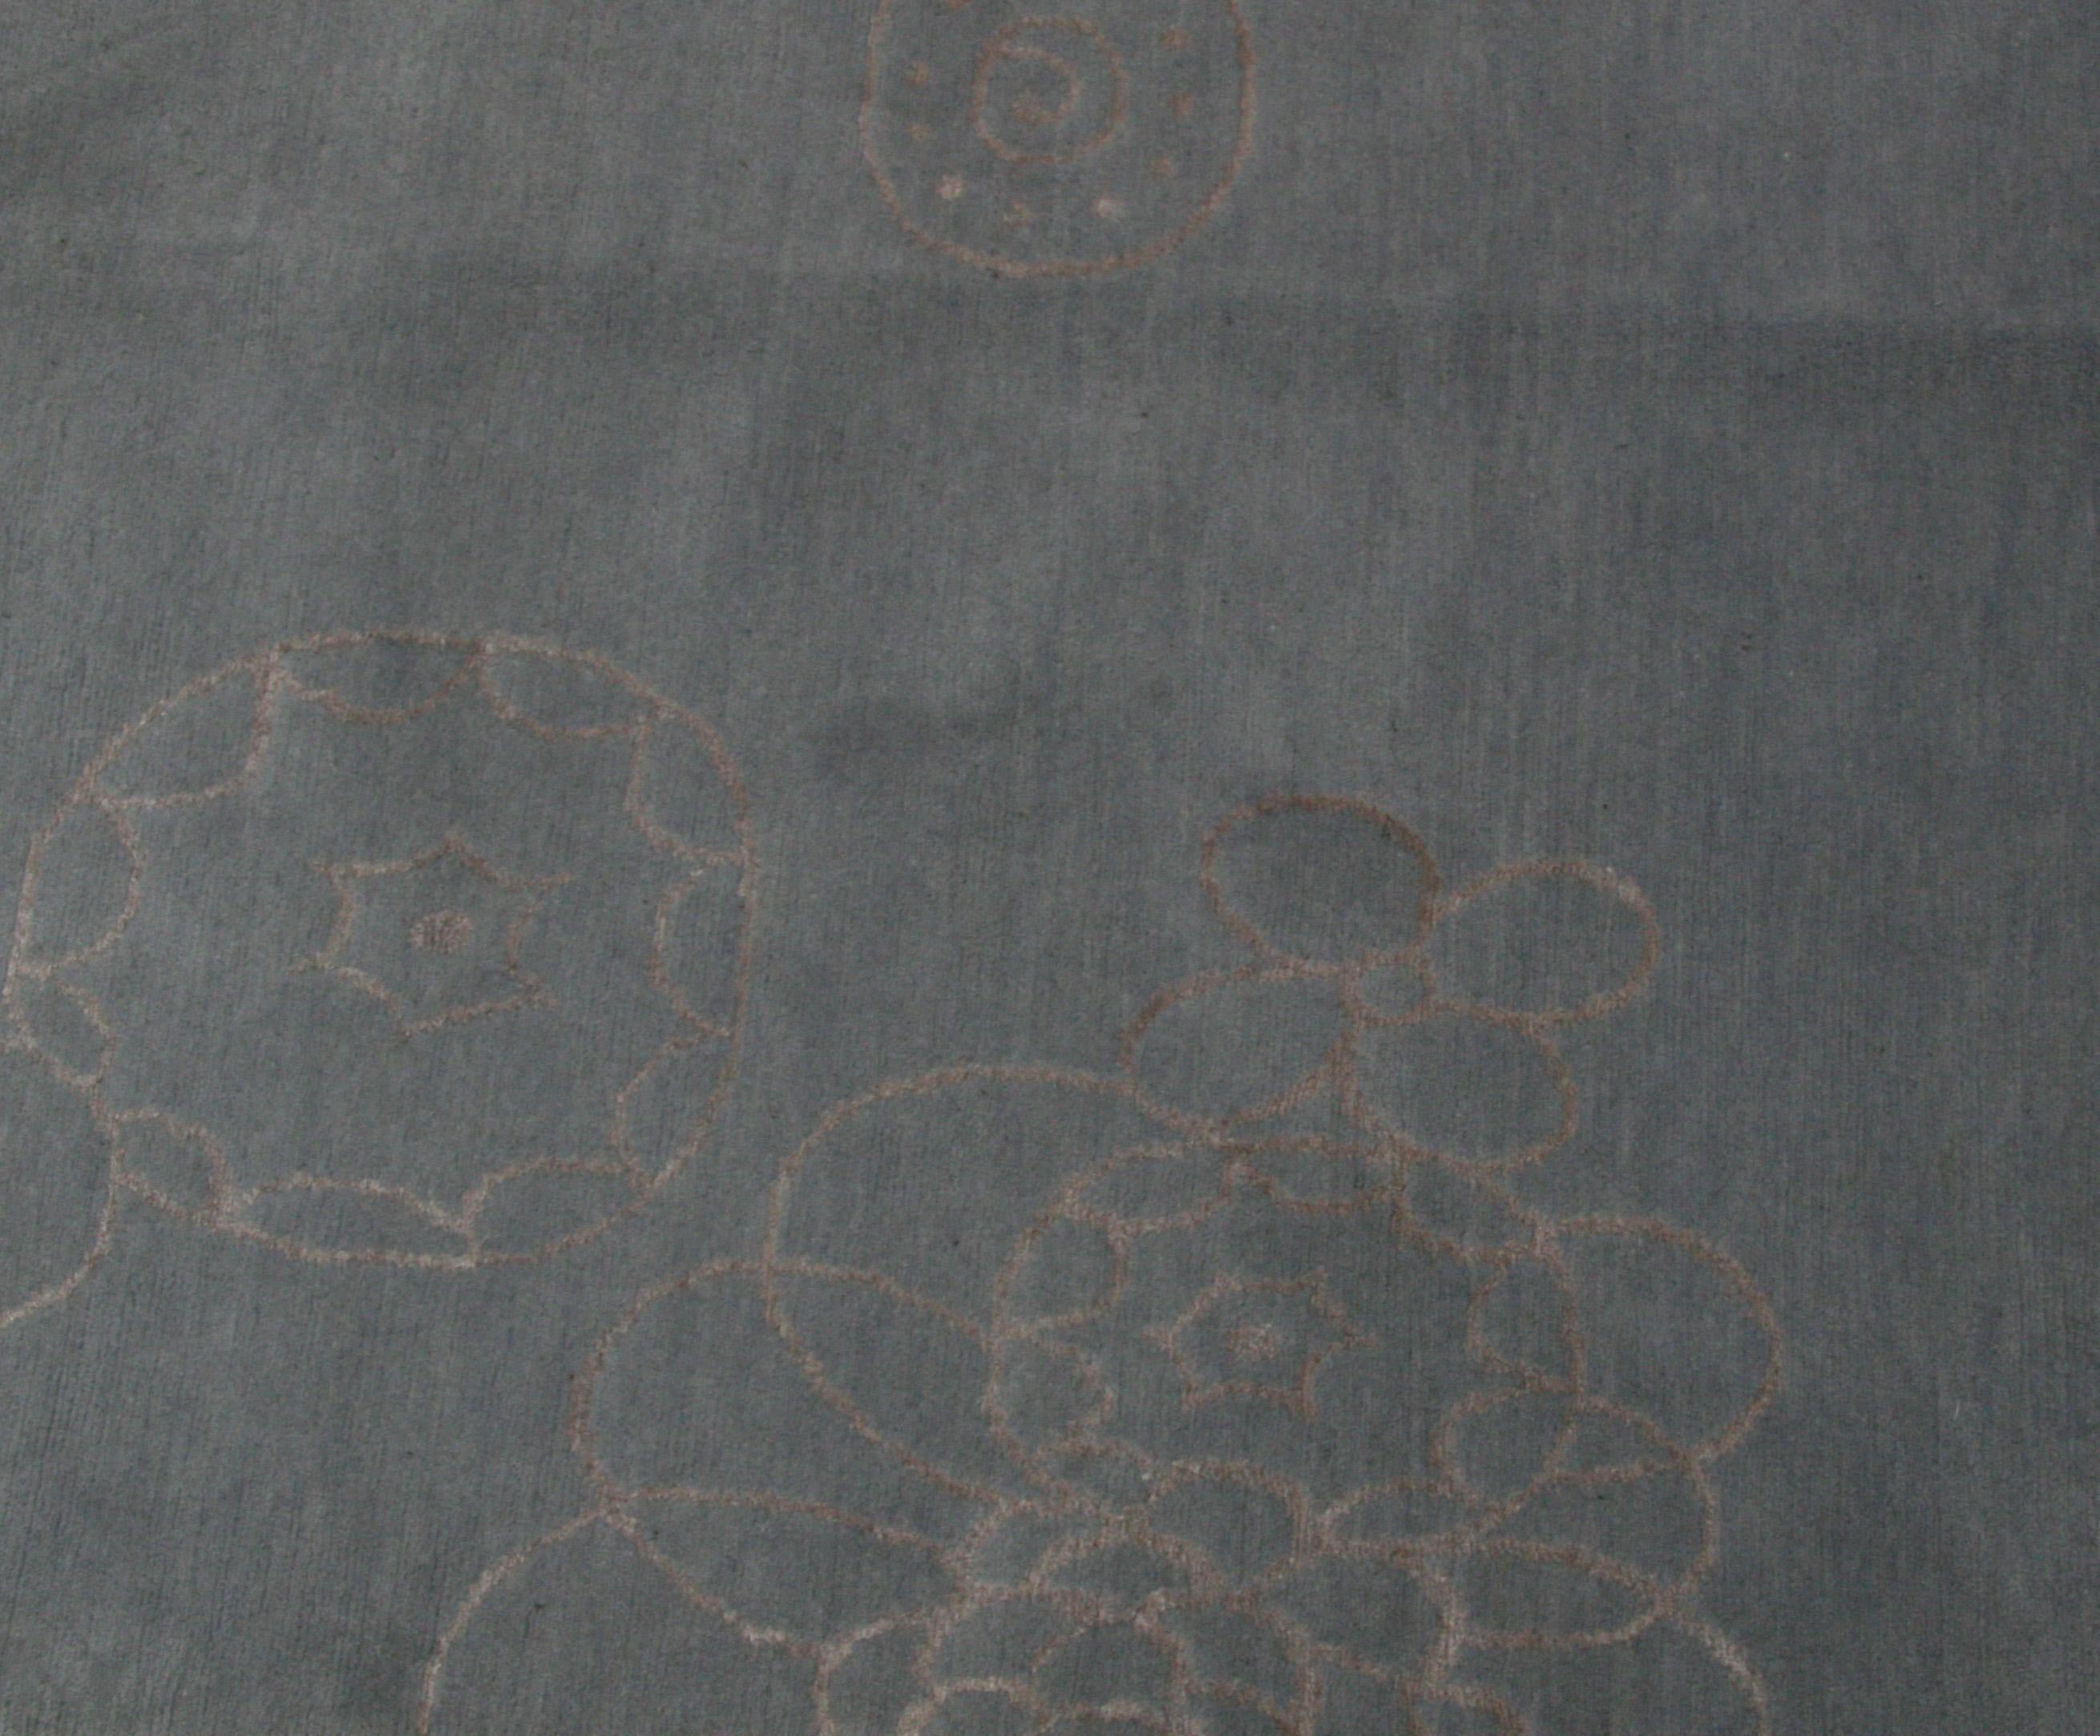 Hand-drawn flowers seem to float effortlessly across a dark gray base in this whimsical contemporary Tibetan design rug. The wool/silk blend makes for a lustrous texture that is also provides durable comfort under foot. Hand-knotting creates 'light'